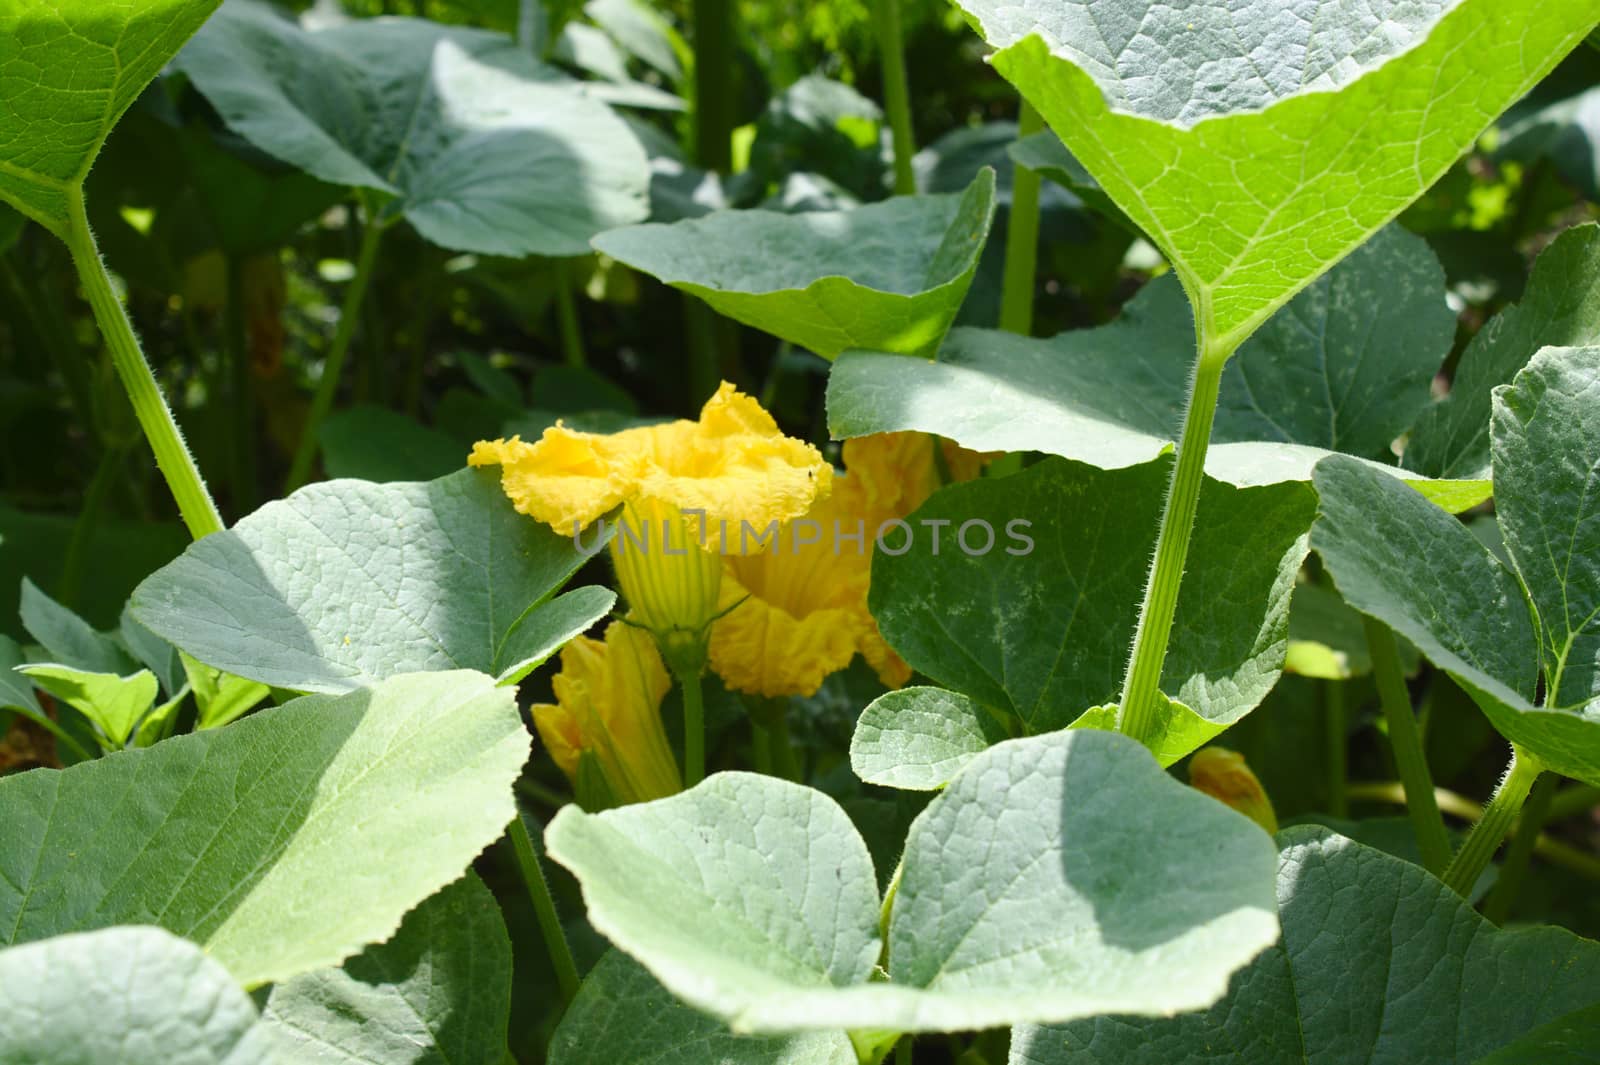 pumpkin plants with blossoms in the summer by martina_unbehauen